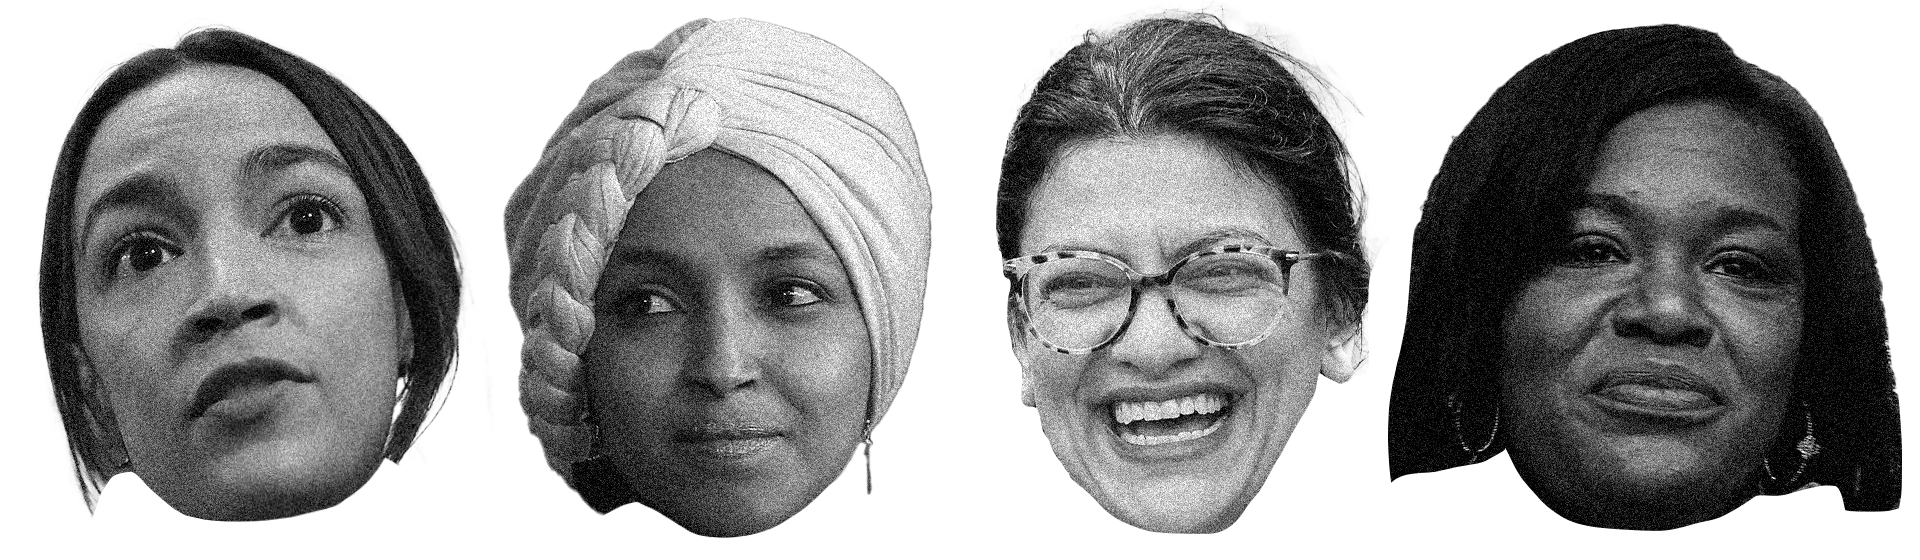 The faces of AOC, Ilhan Omar, Rashida Tlaib, and Cori Bush, in black-and-white and side by side.